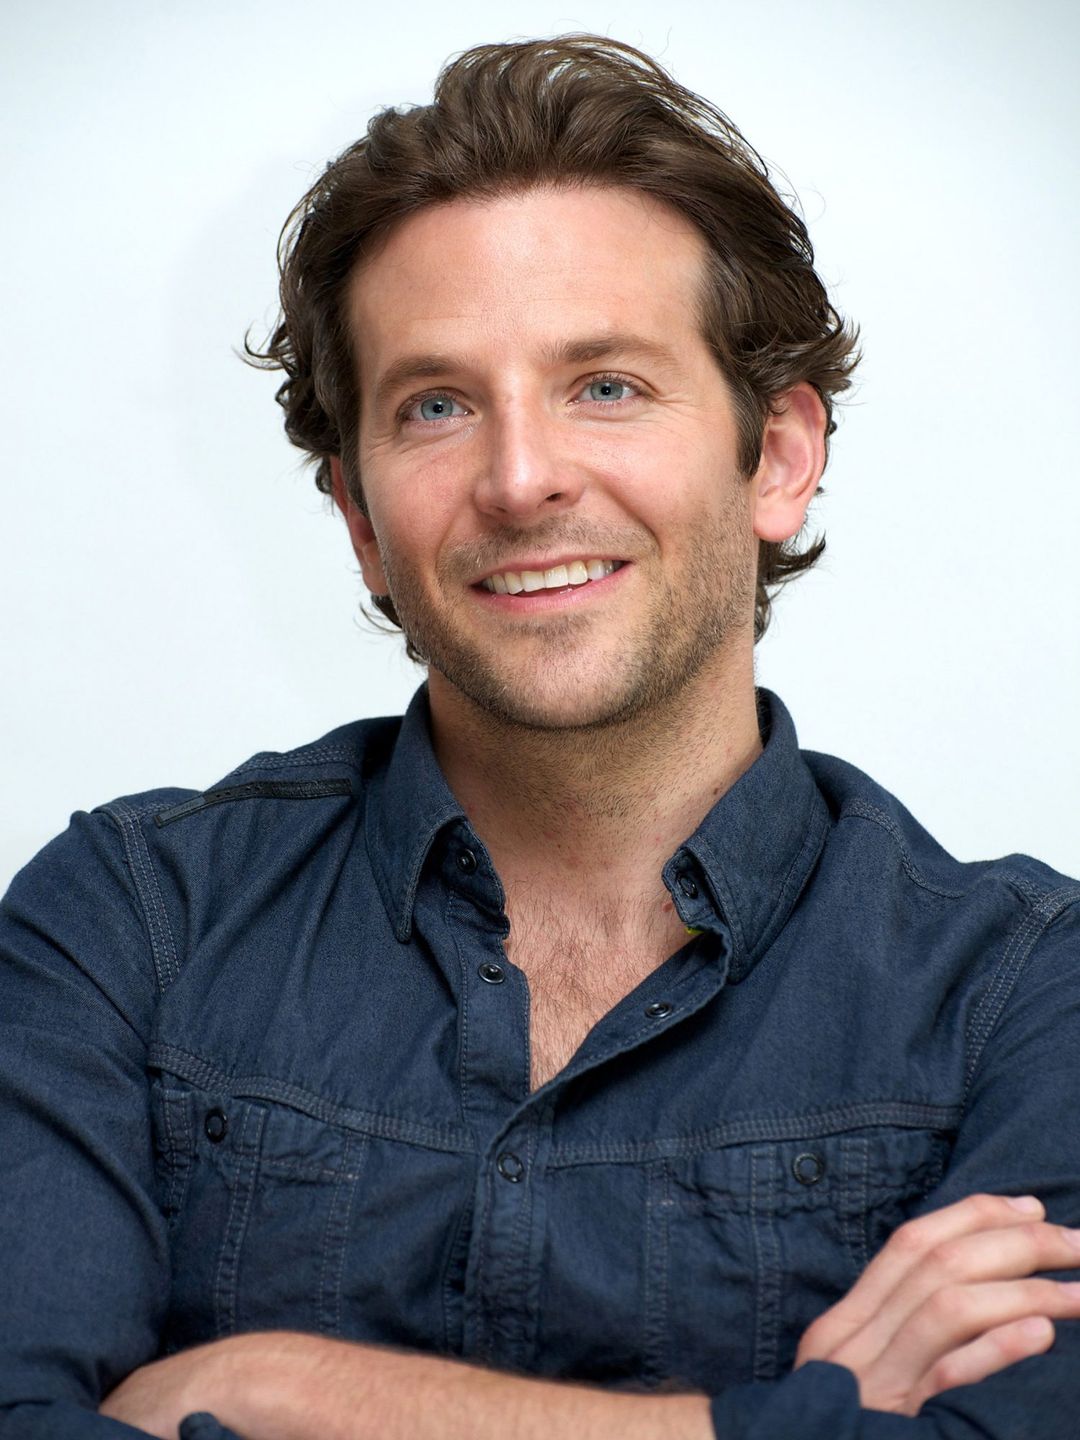 Bradley Cooper where does he live